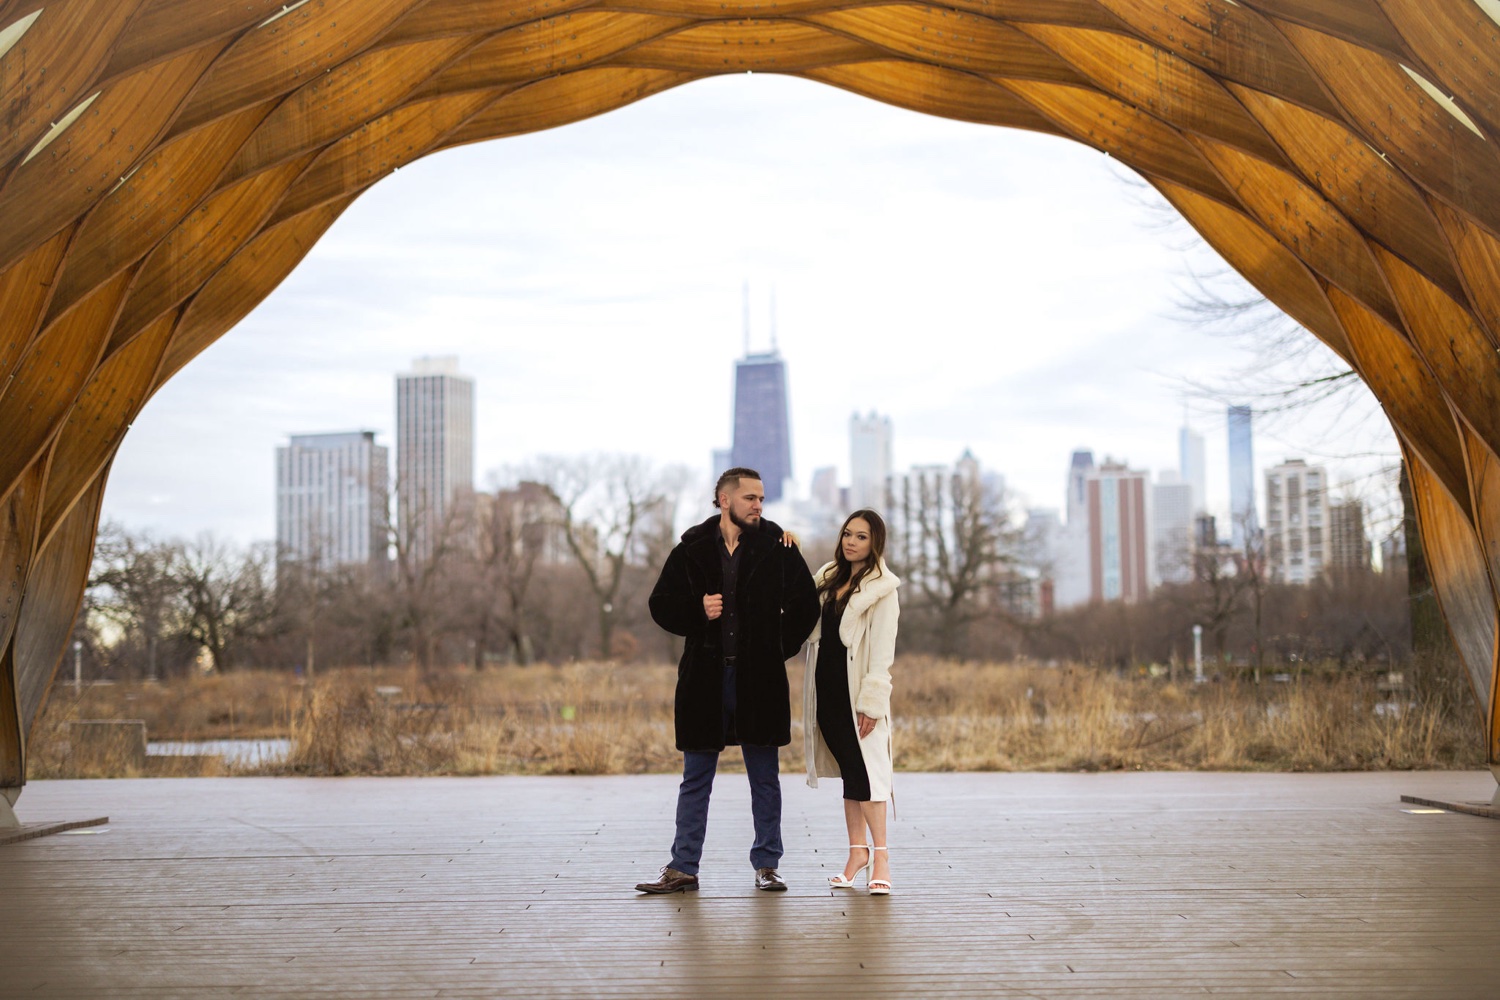 Bianca and John's Snowy Engagement Session in Central Park - Jakub Redziniak